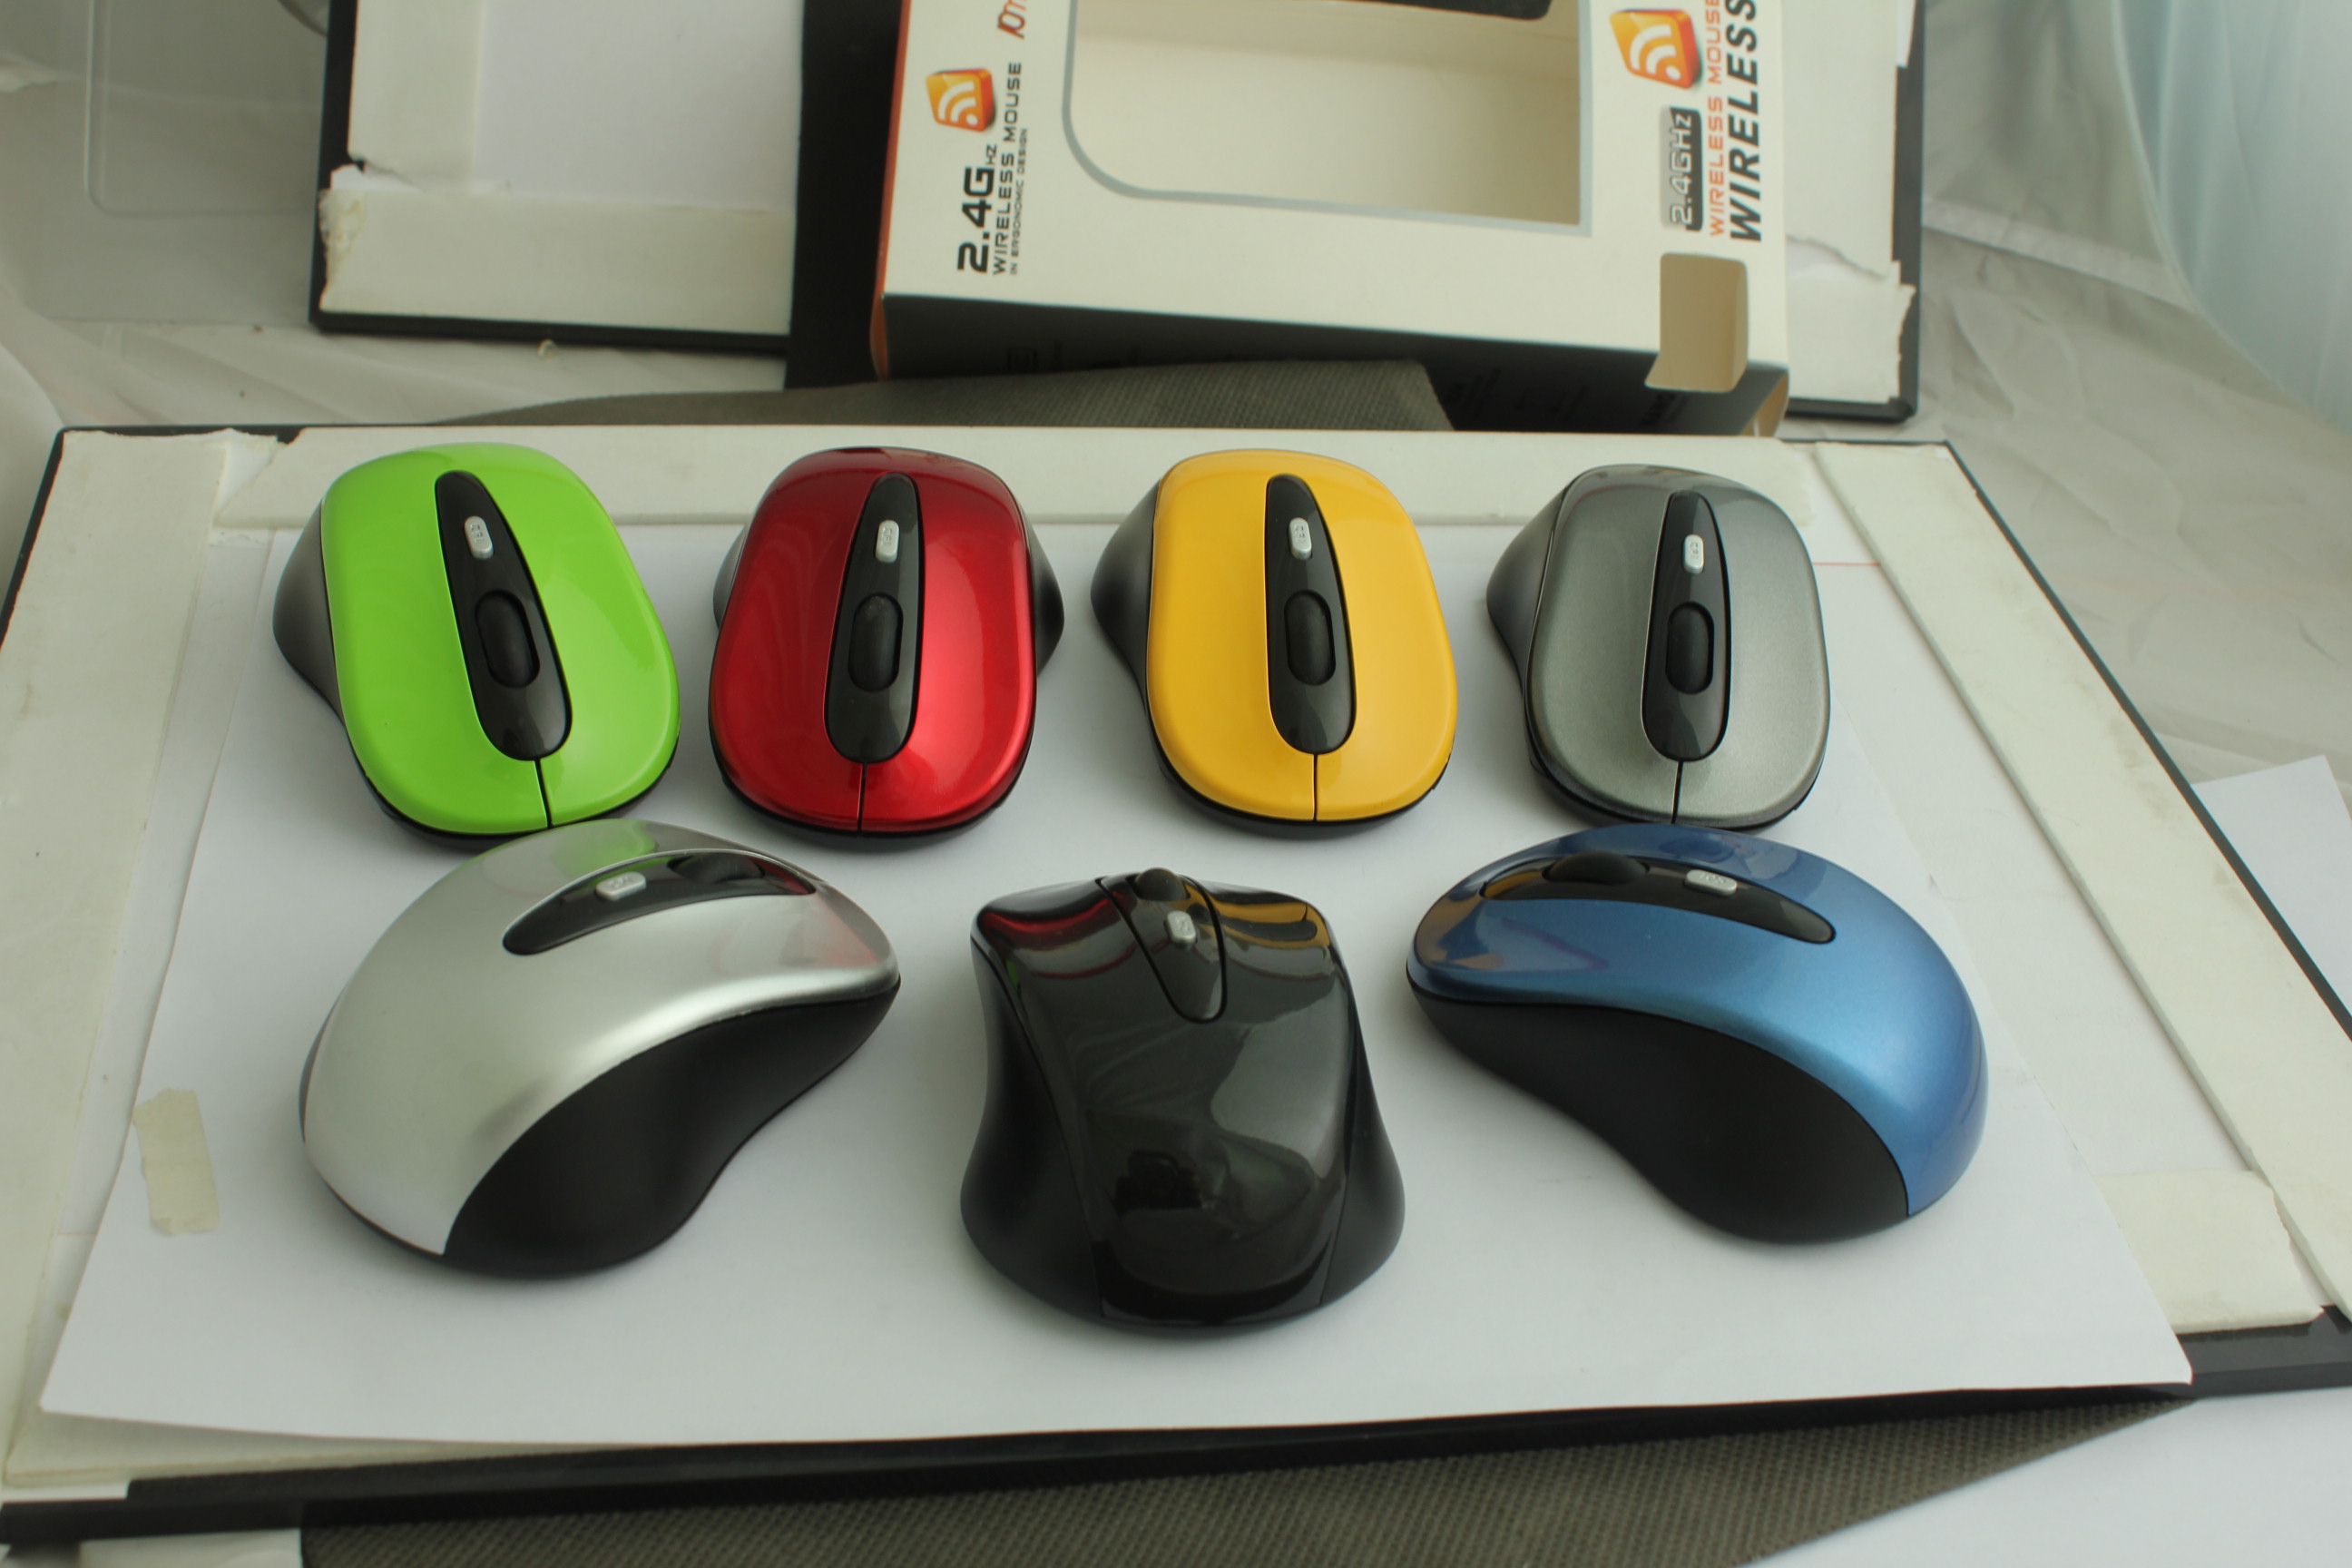 mouse, wired mouse, wireless mouse, optical mouse, 2.4G wireless mouse